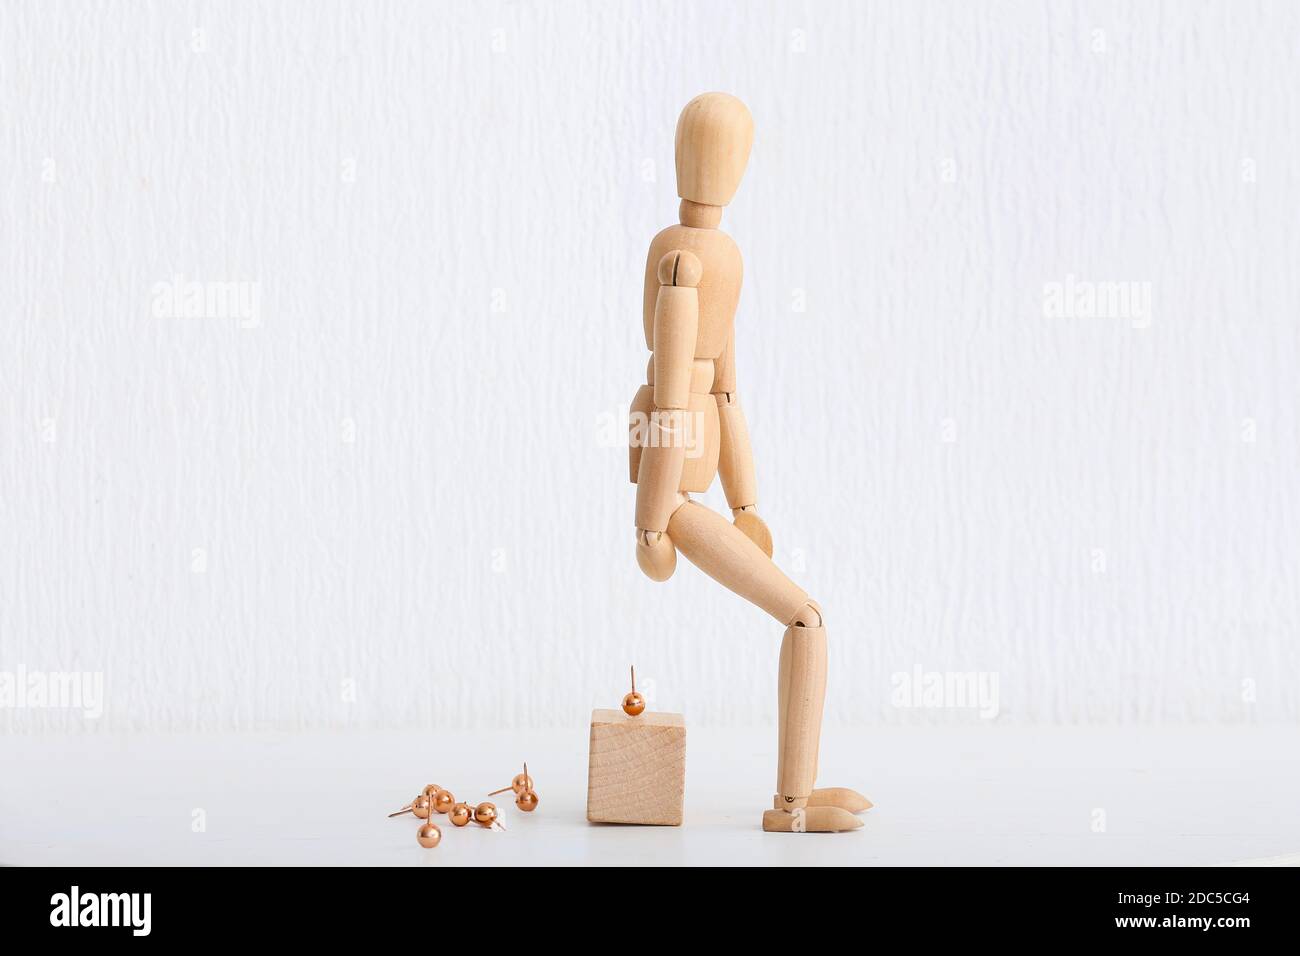 Wooden mannequin and pins on white background. Concept of hemorrhoids Stock Photo